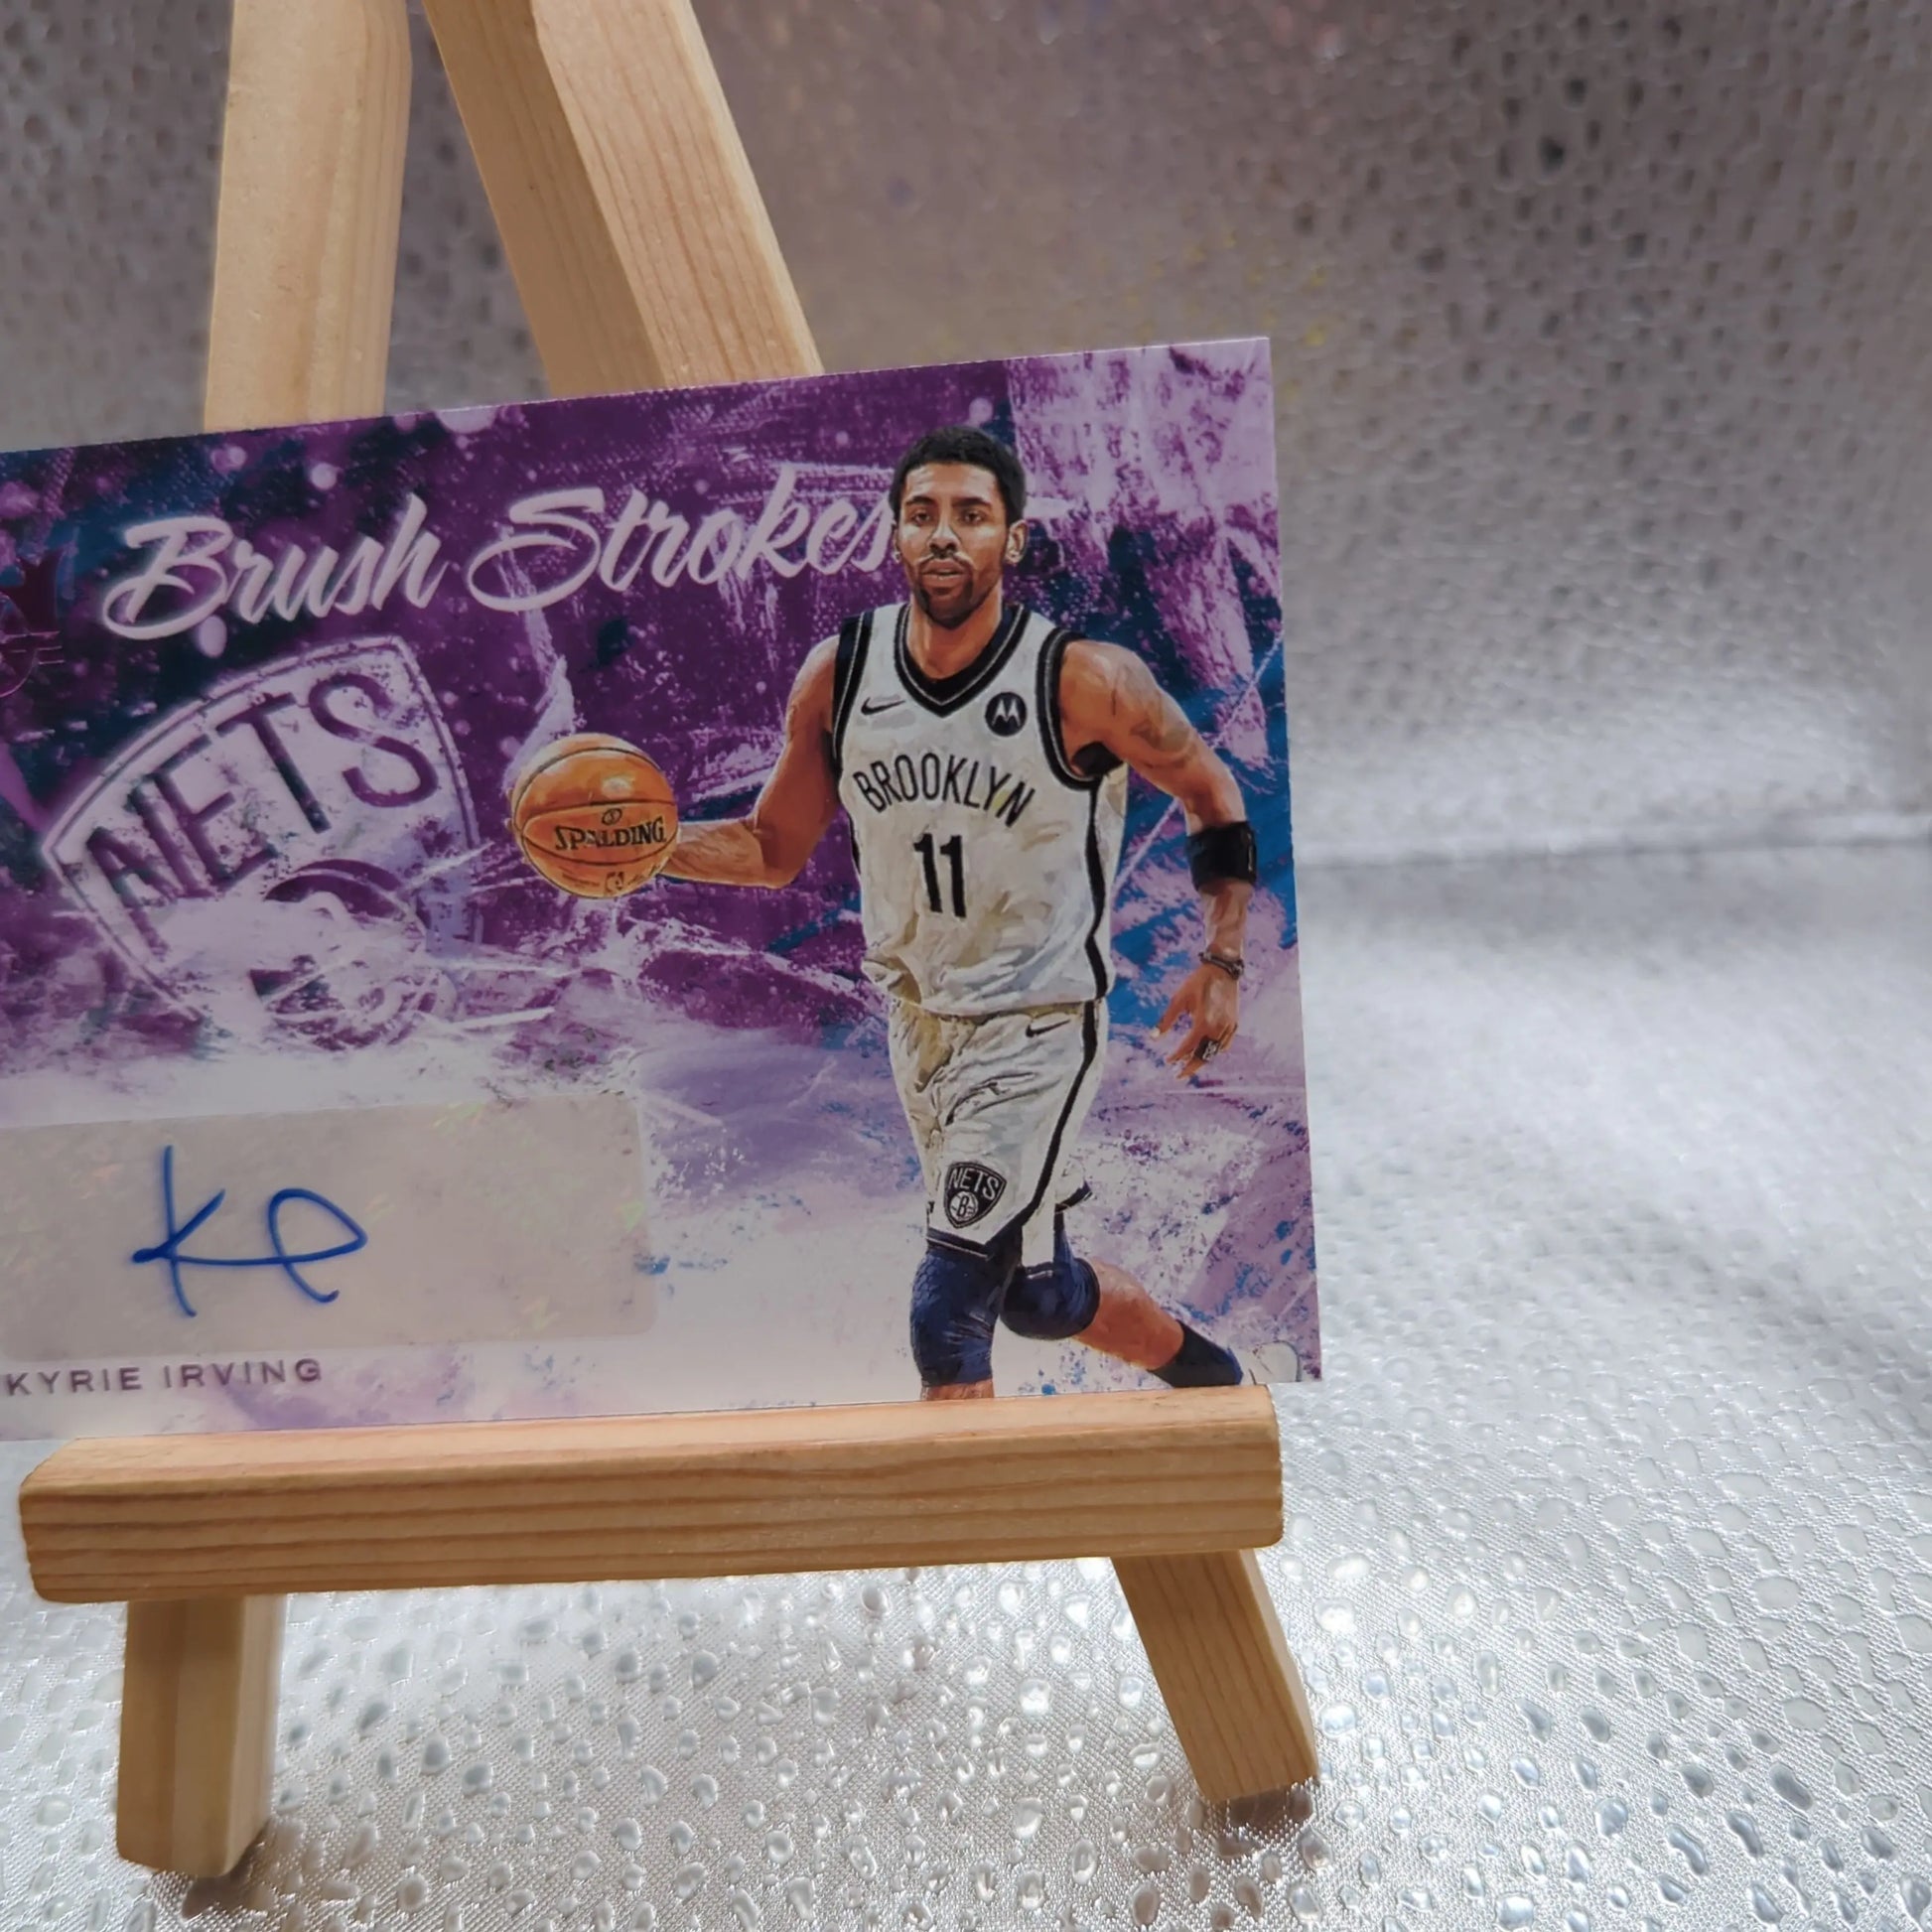 2021-2022 COURT KINGS - Kyrie Irving /8 AUTO - Brooklyn nets SSP FRENLY BRICKS - Open 7 Days